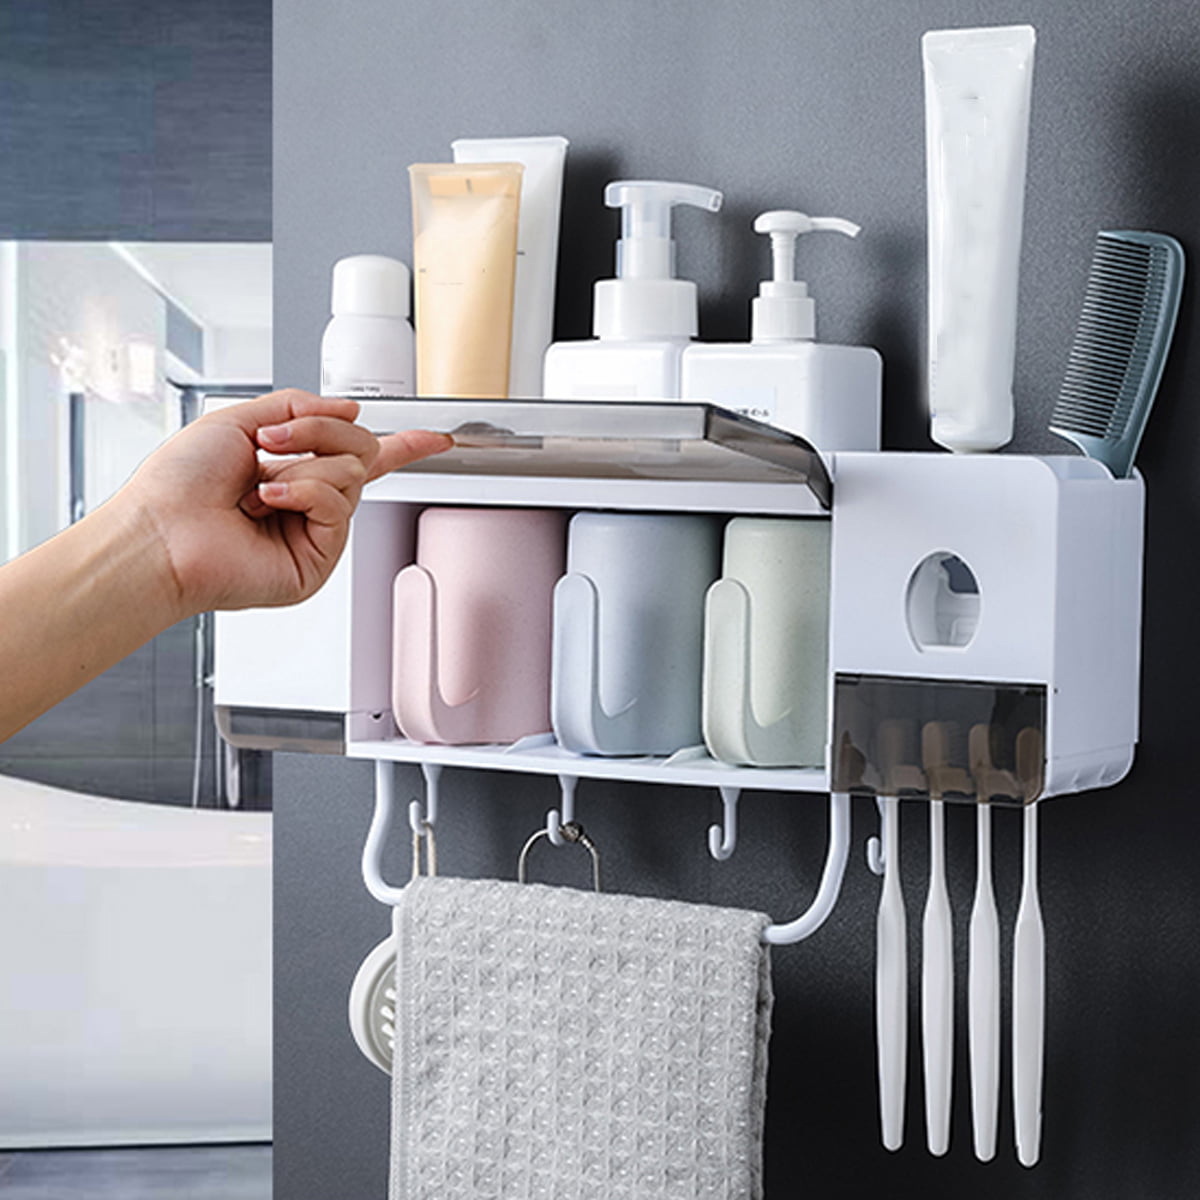 Details about   Automatic Wall Mount Toothpaste Dispenser Squeezer Bathroom Accessories Family T 